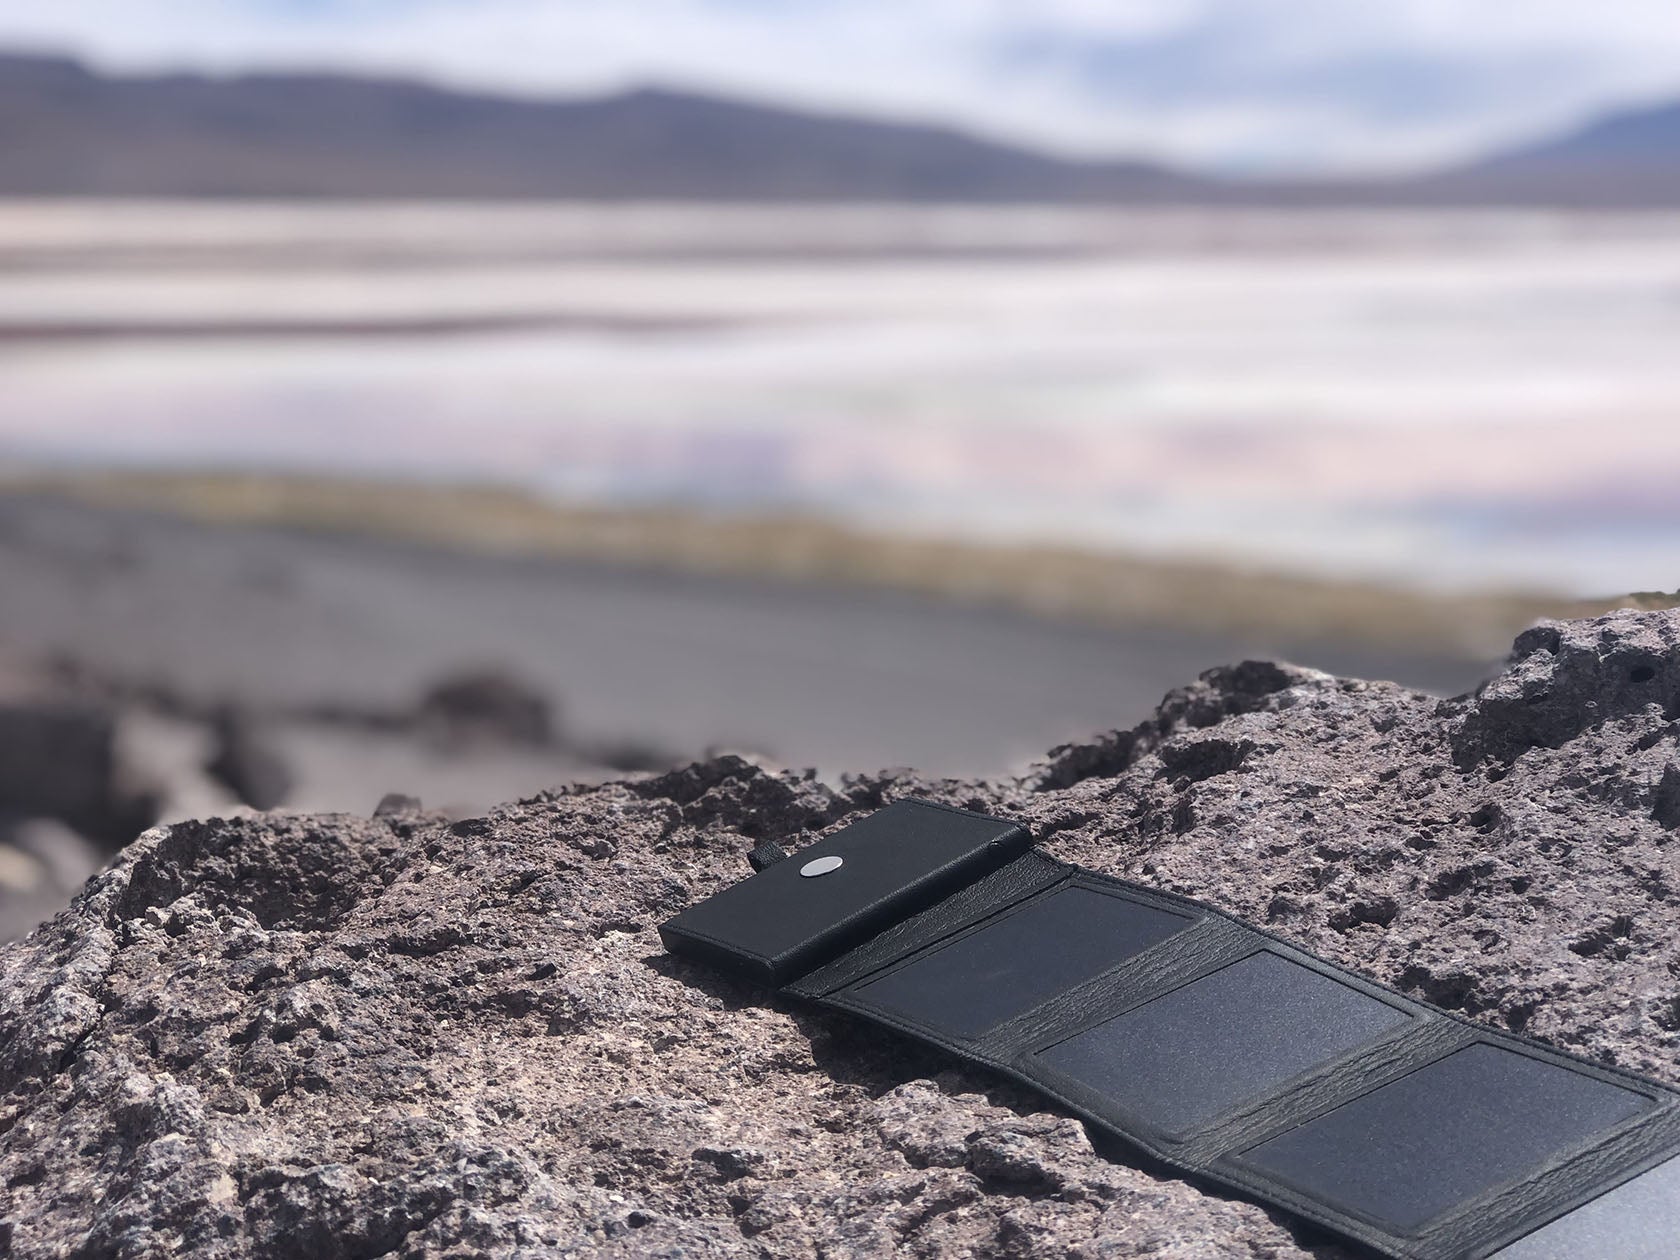 solar power bank (photon) in the sun and on a rock 